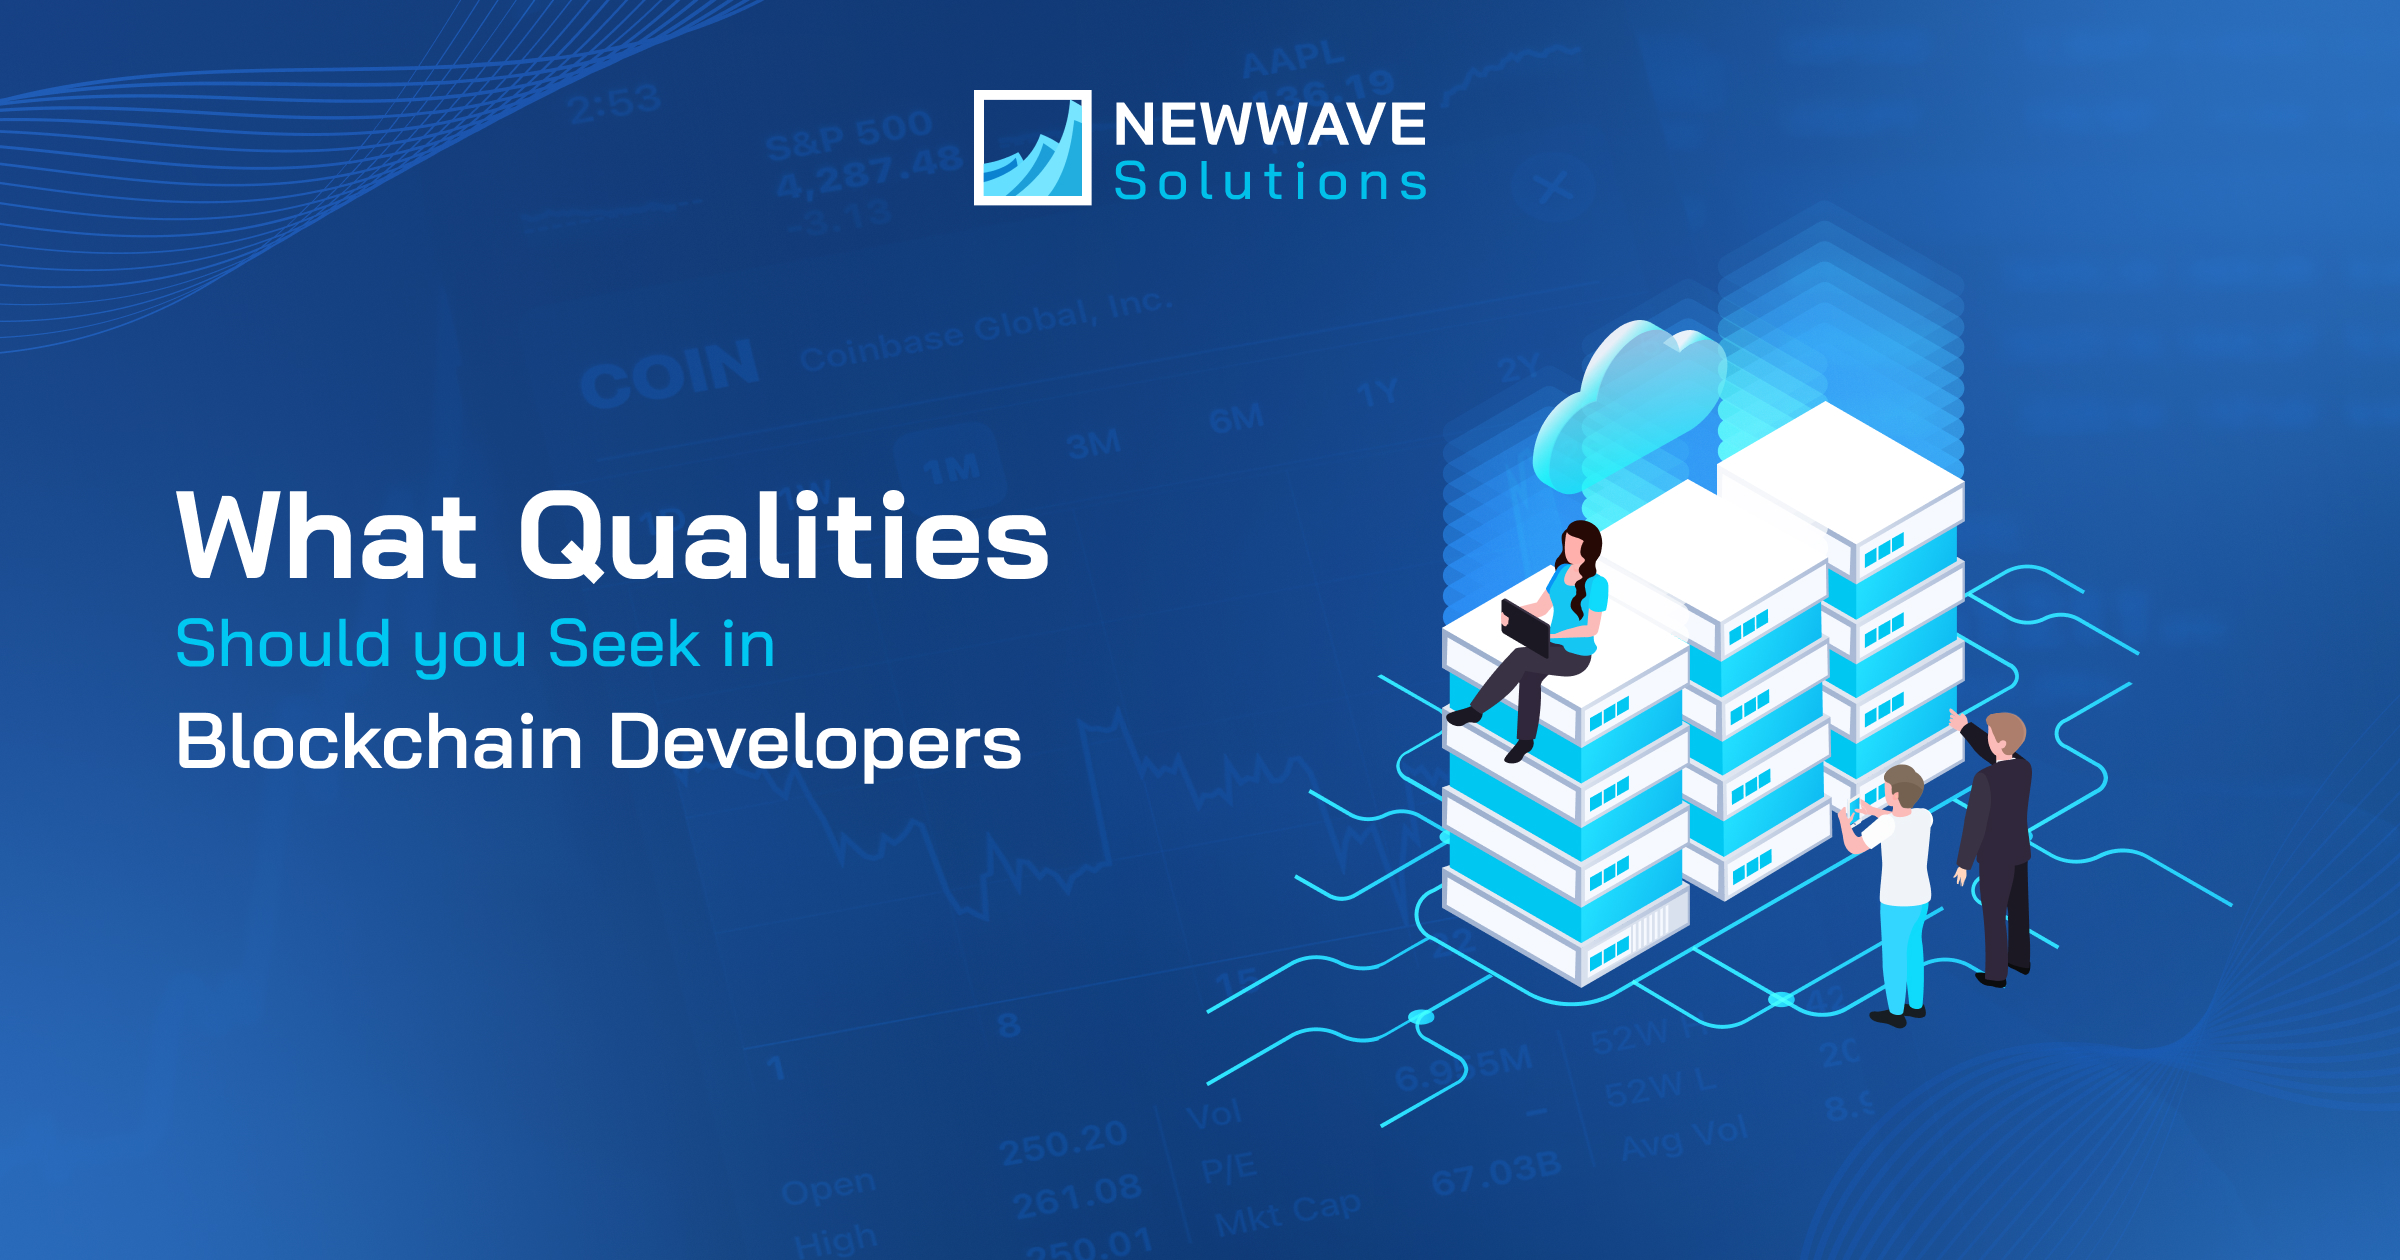 What Qualities Should you Seek in Blockchain Developers